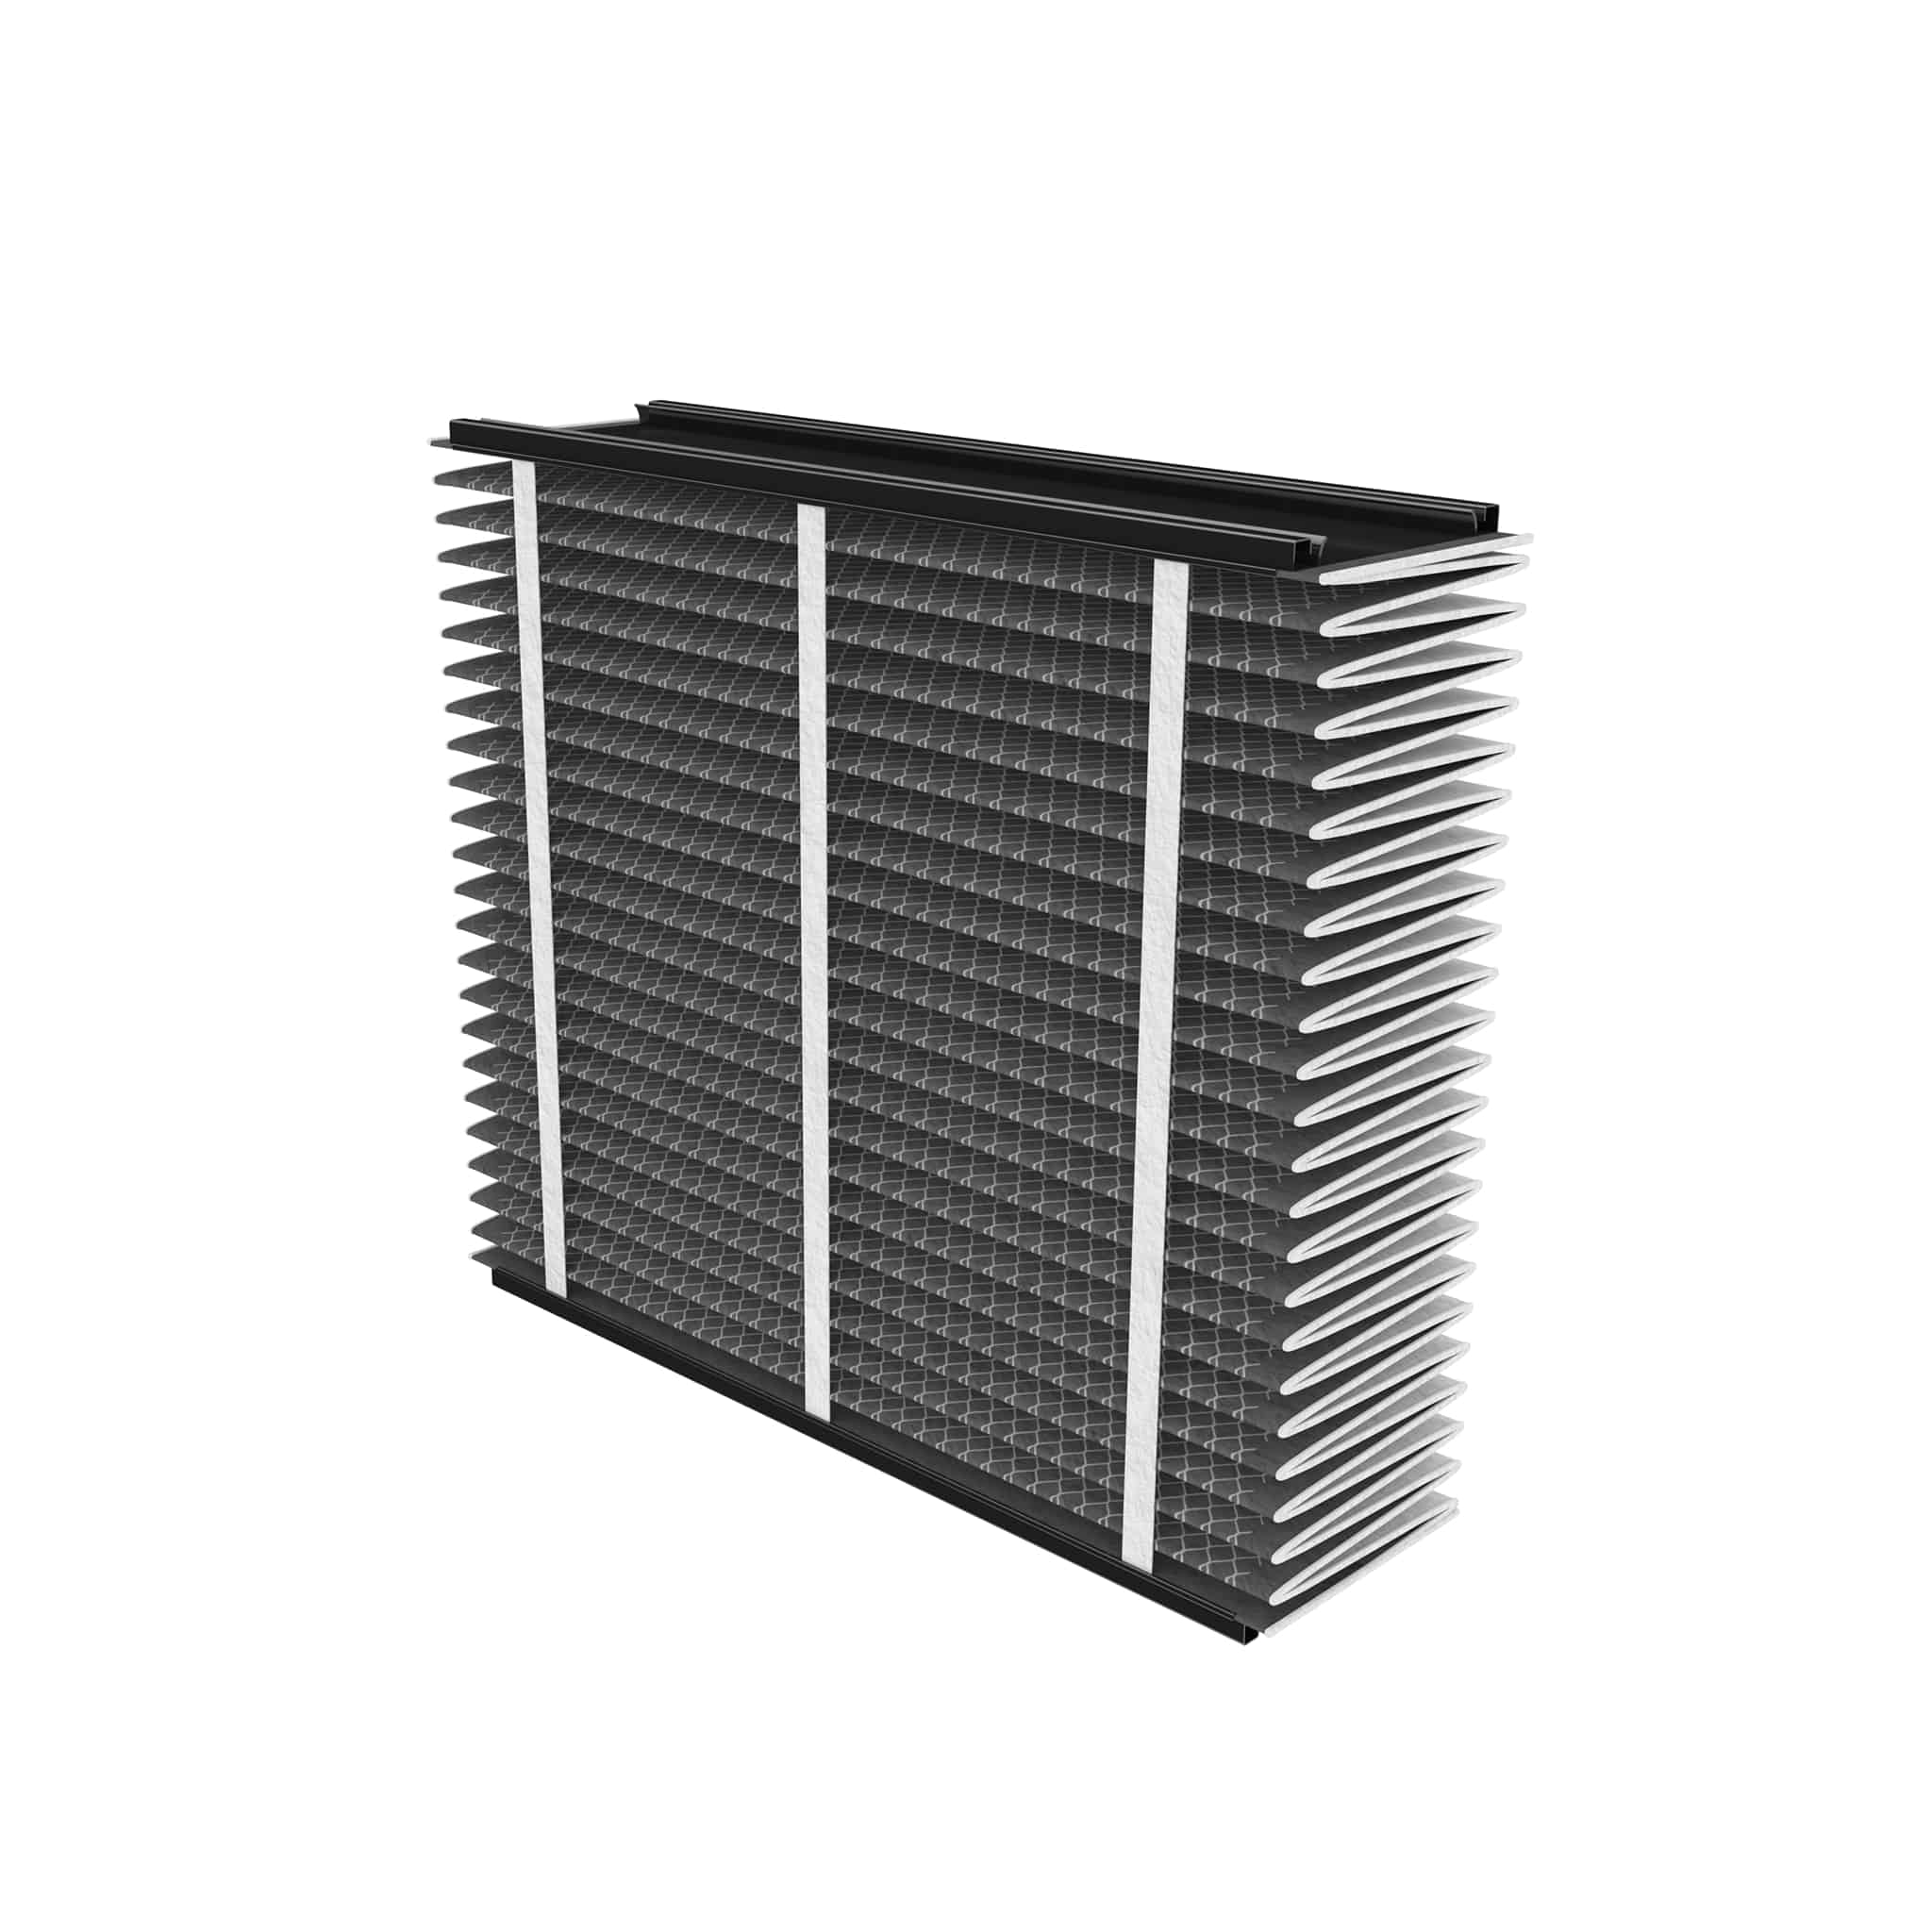 Aprilaire Cbn Odor Reduction Air Filter For Aprilaire Whole Home Air